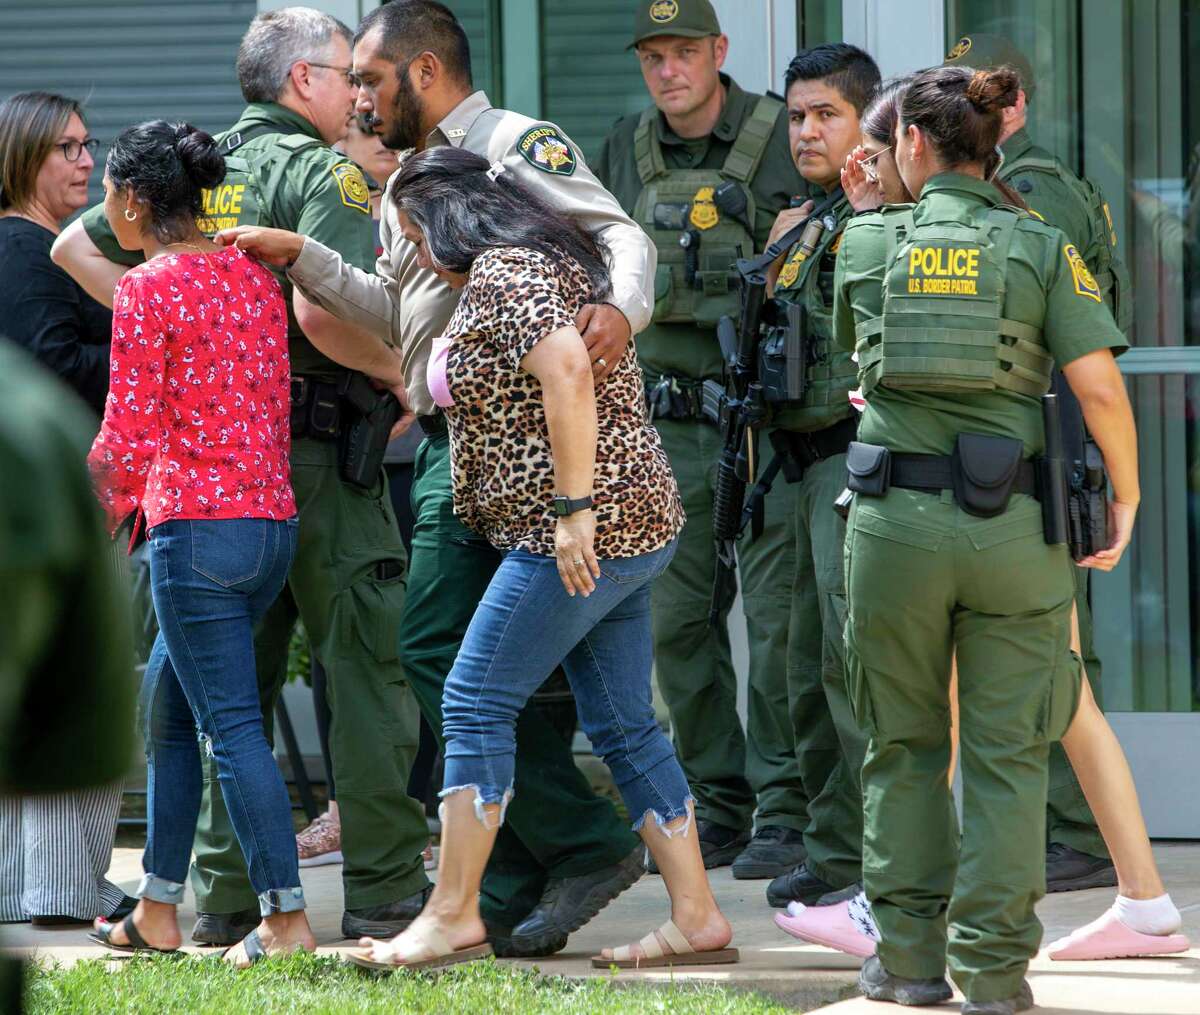 People leave the Uvalde Civic Center Tuesday, May 24, 2022. At least 14 students and 1 teacher were killed when a gunman opened fire at Robb Elementary School in Uvalde according to Texas Gov. Greg Abbott. Students from the school were evacuated to the civic center.